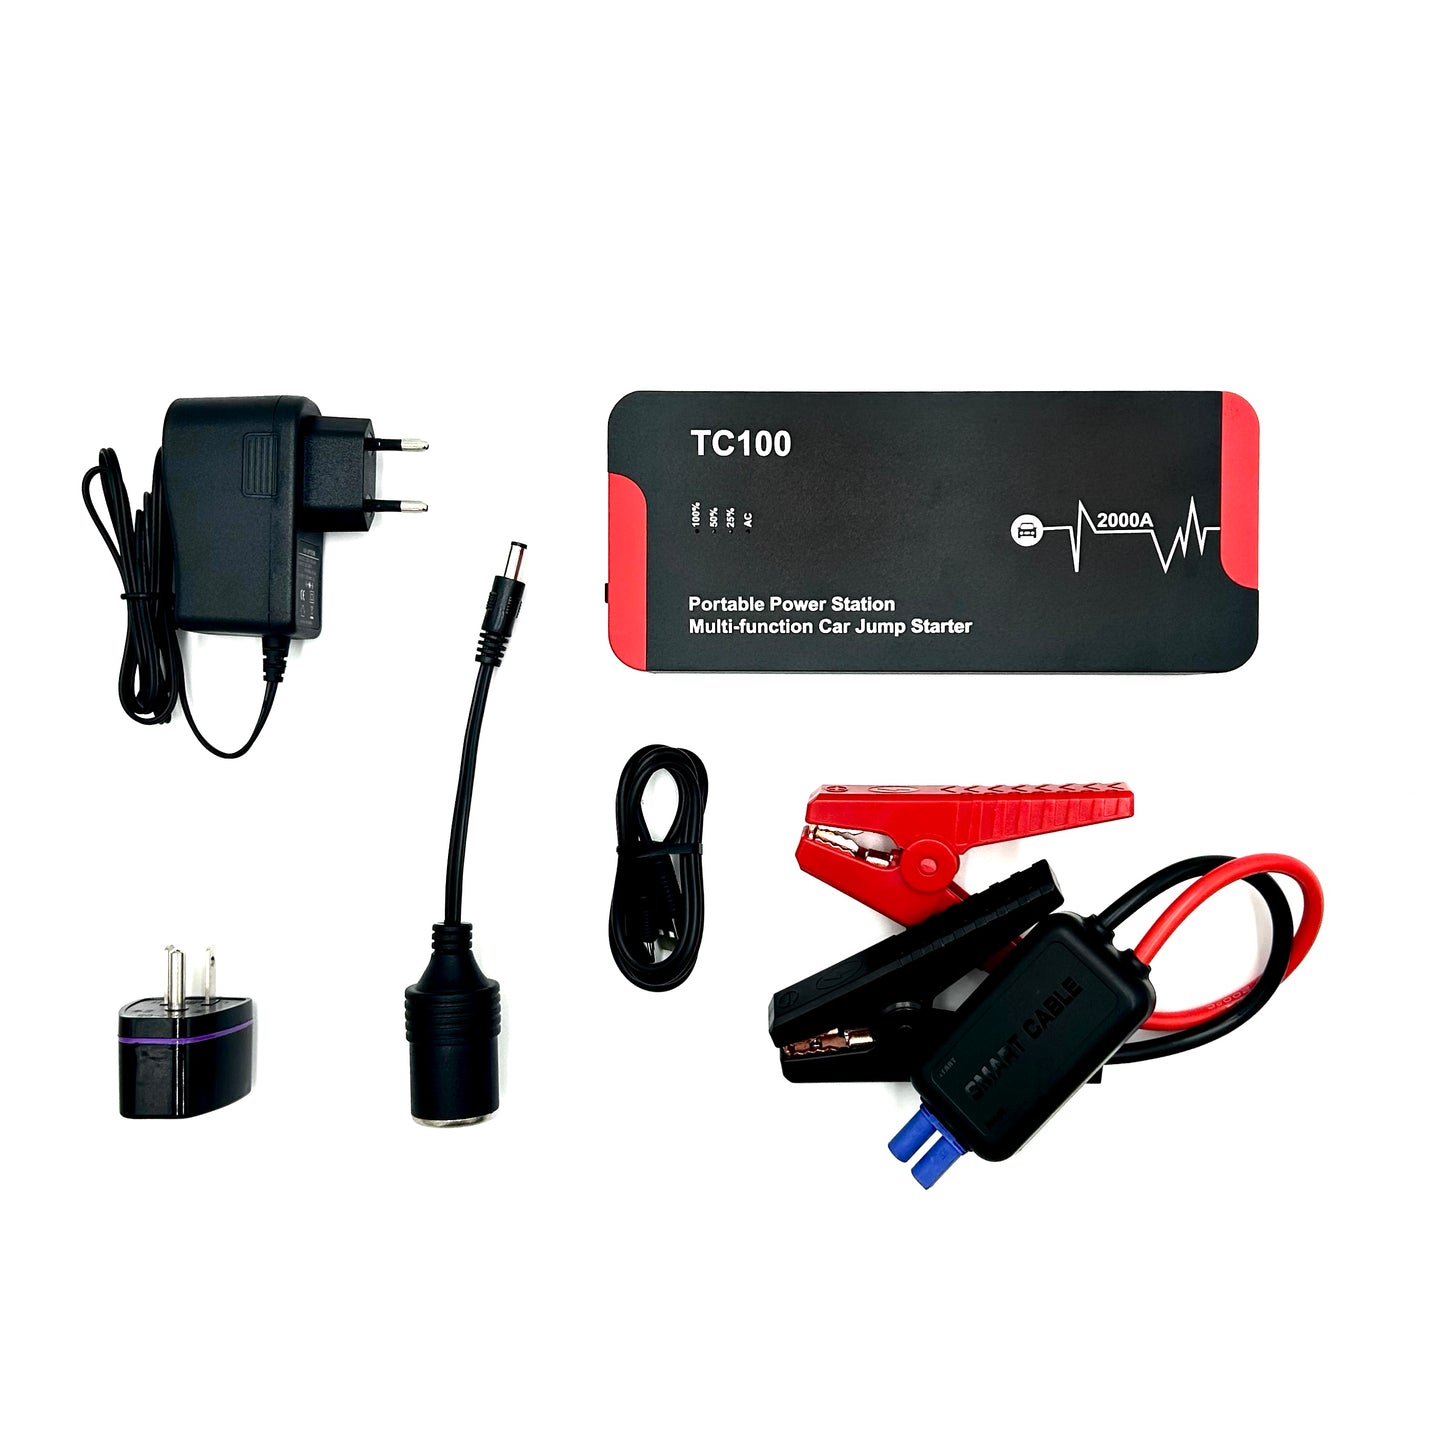 TC100 | Heavy Duty Multi Functional Jump Starter and UPS | Car Jump starter with AC output 18000mah, AC100W output